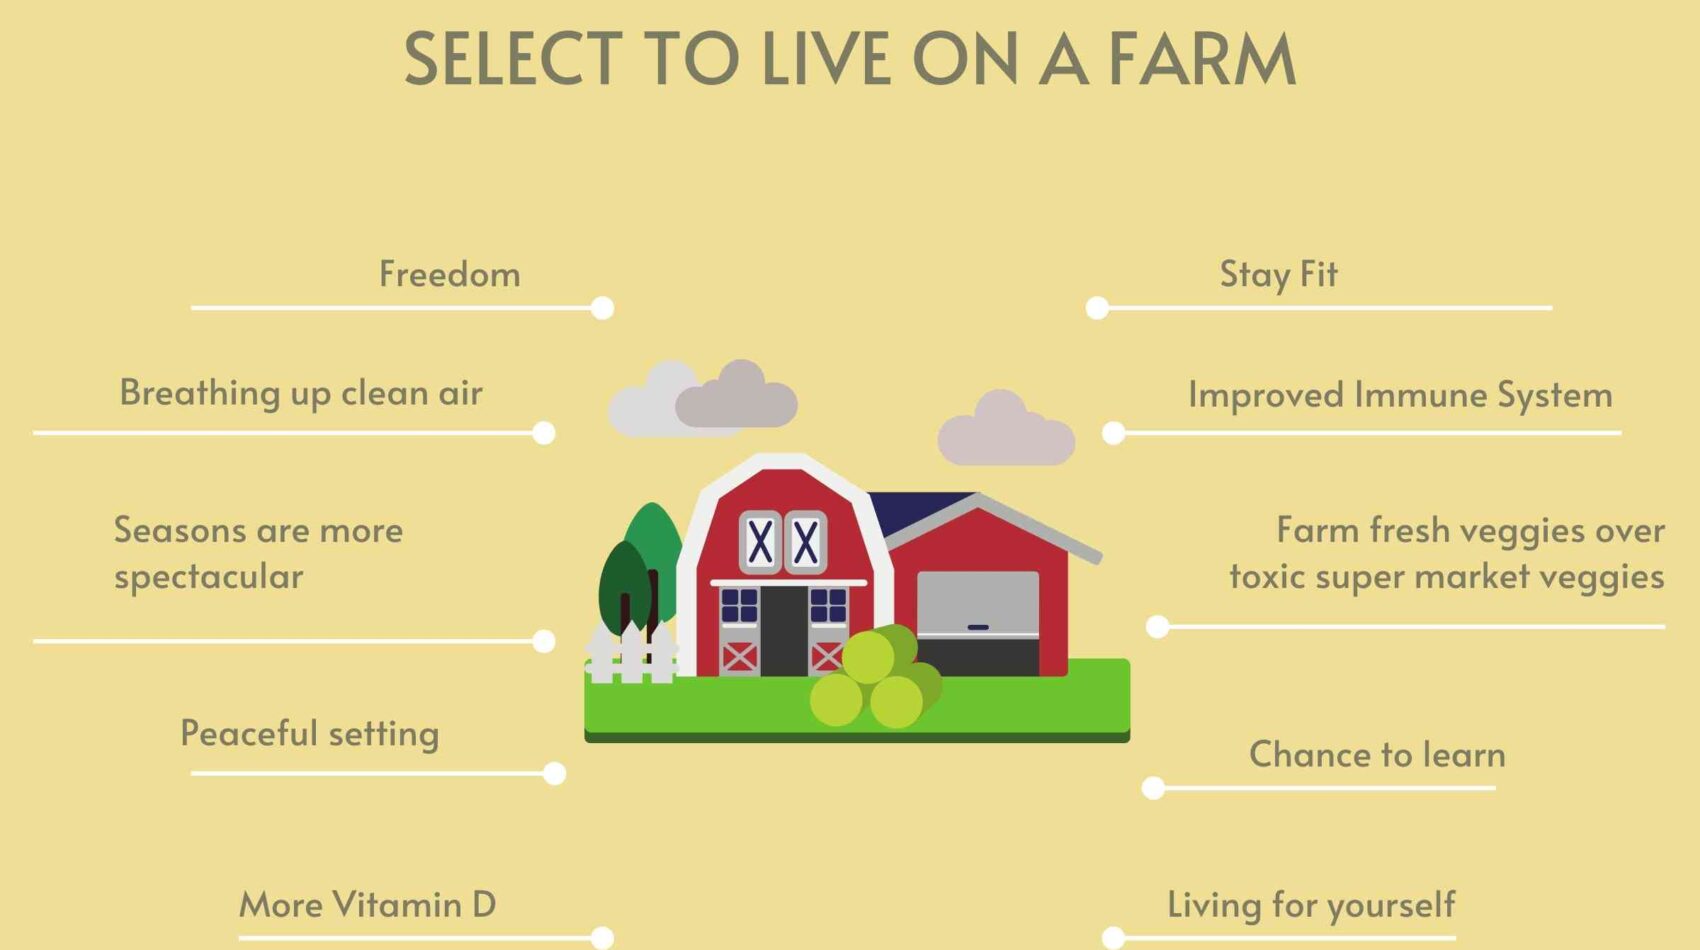 Top 10 Reasons Why One Should Select To Live In Farm